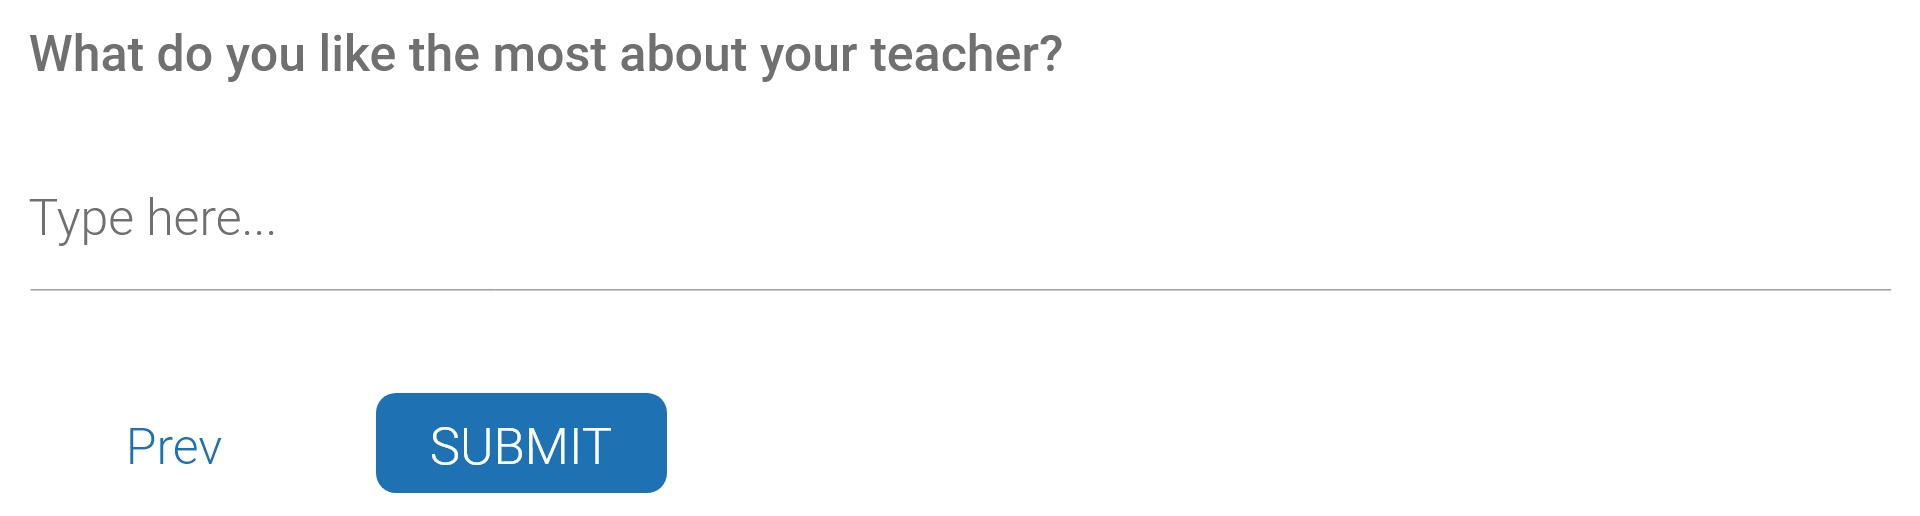 survey assignment for high school